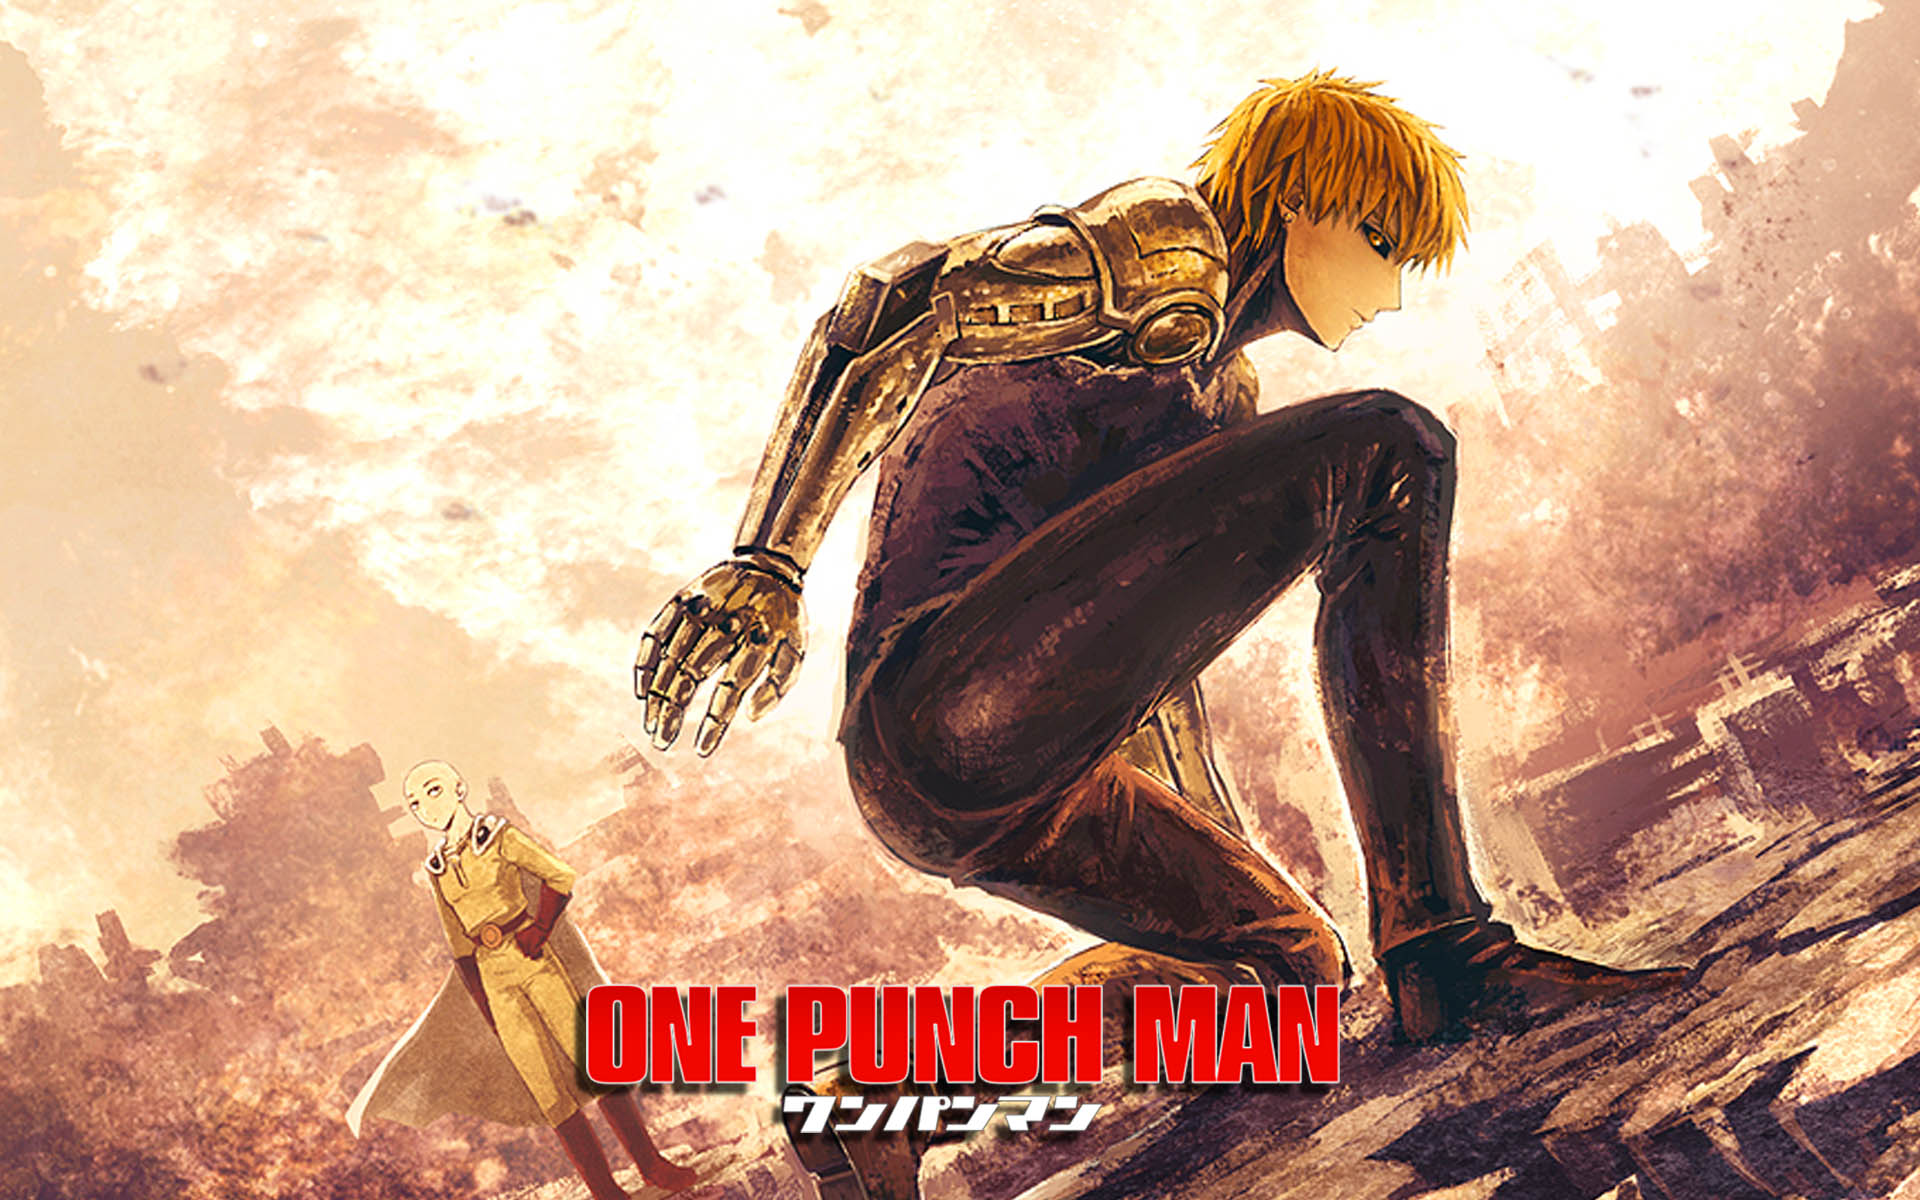 One Punch Man Genos HD Wallpaper Is This